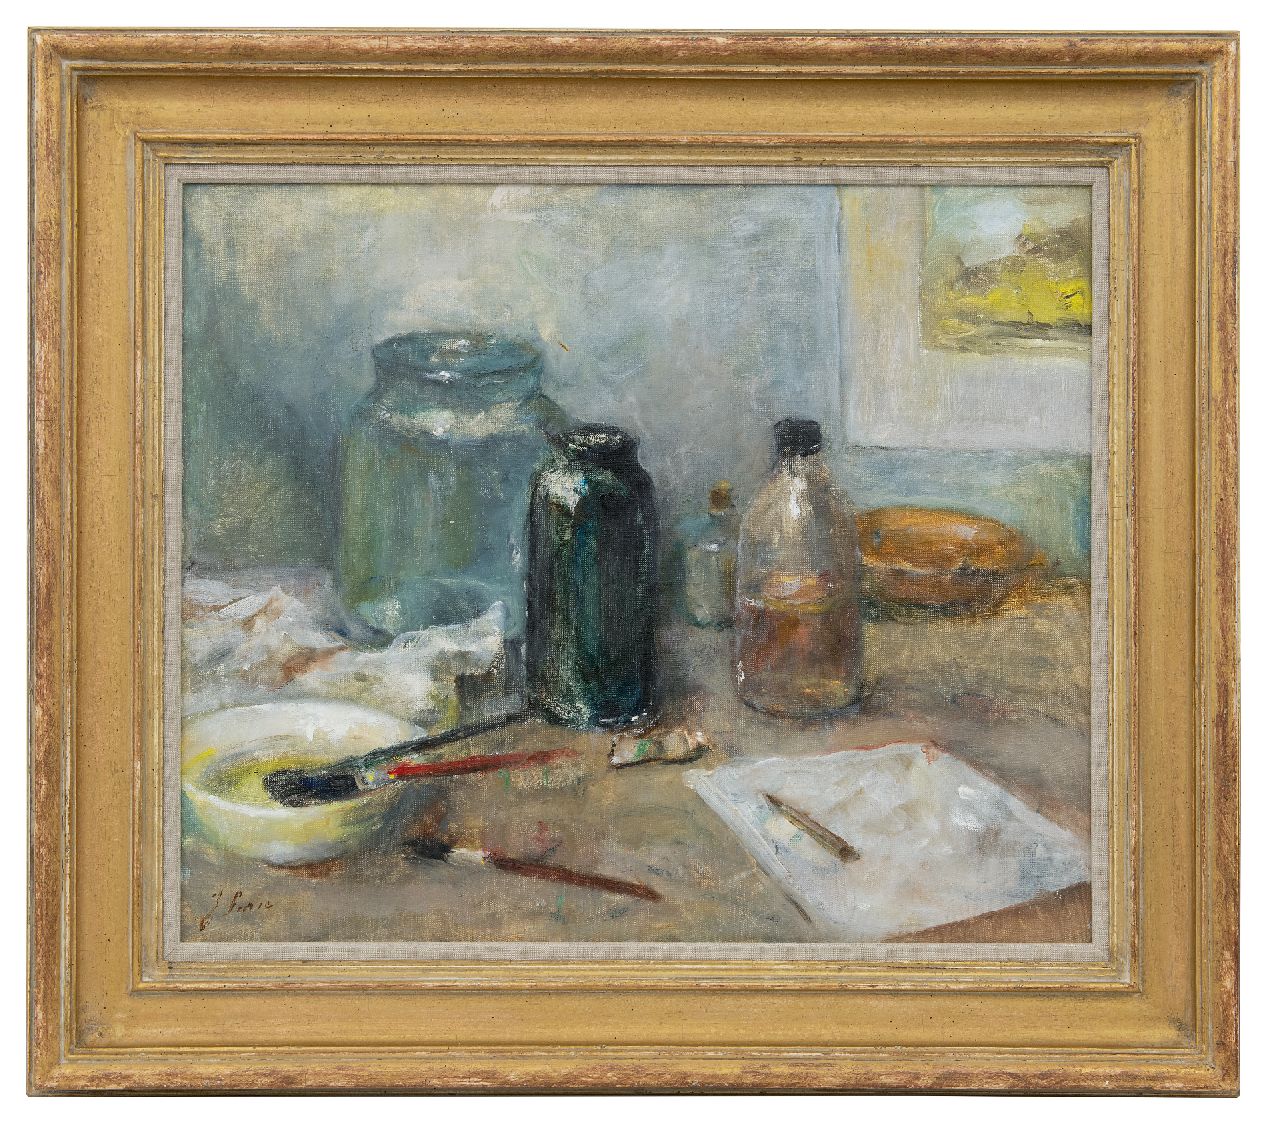 Surie J.  | Jacoba 'Coba' Surie | Paintings offered for sale | Still life of painting supplies, oil on canvas 50.1 x 60.0 cm, signed l.l.